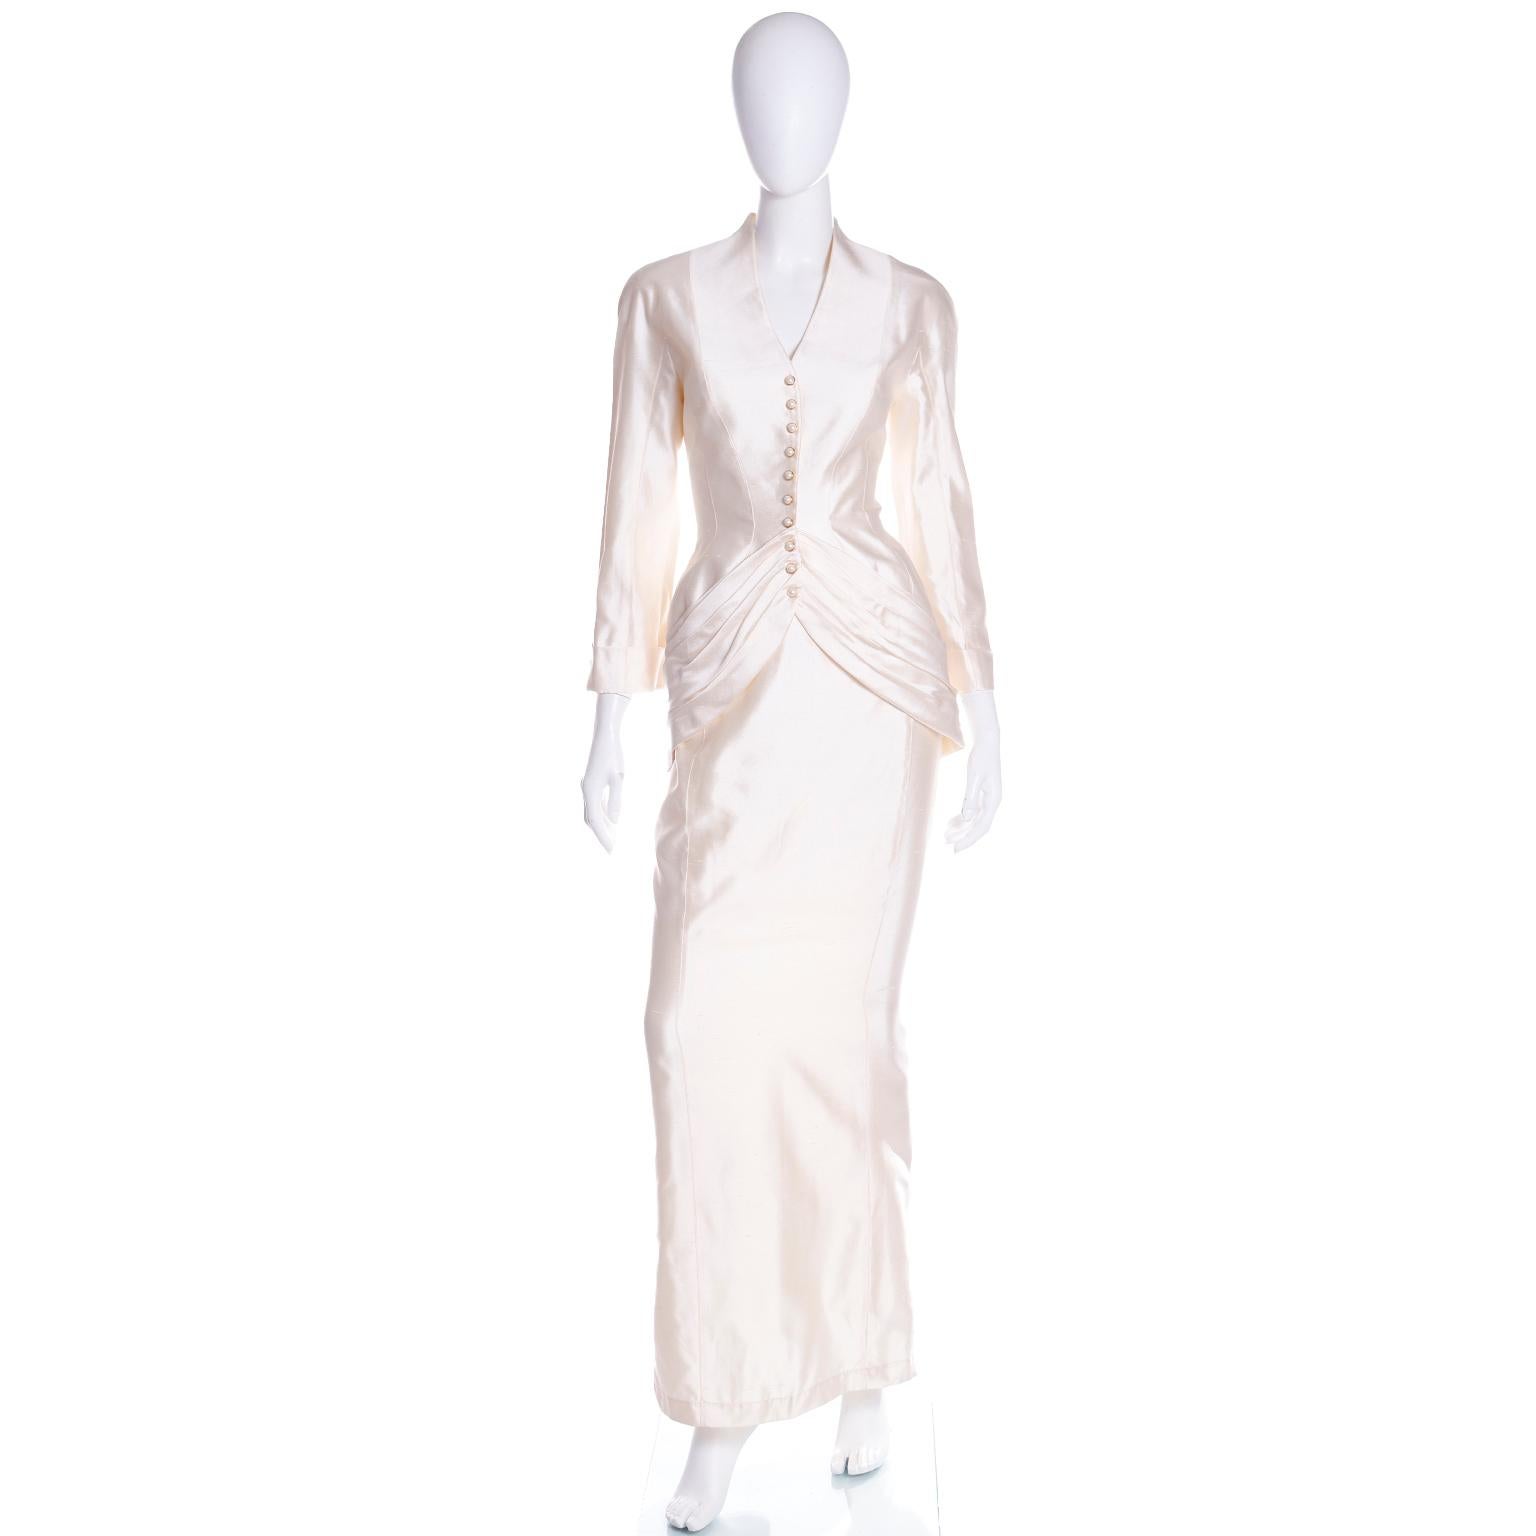 This exquisite Thierry Mugler ensemble is made in a luxurious light cream silk. This gorgeous outfit includes a gathered jacket  with a longer back, and a long straight skirt. When paired together, they create an exquisite, iconic Mugler silhouette.